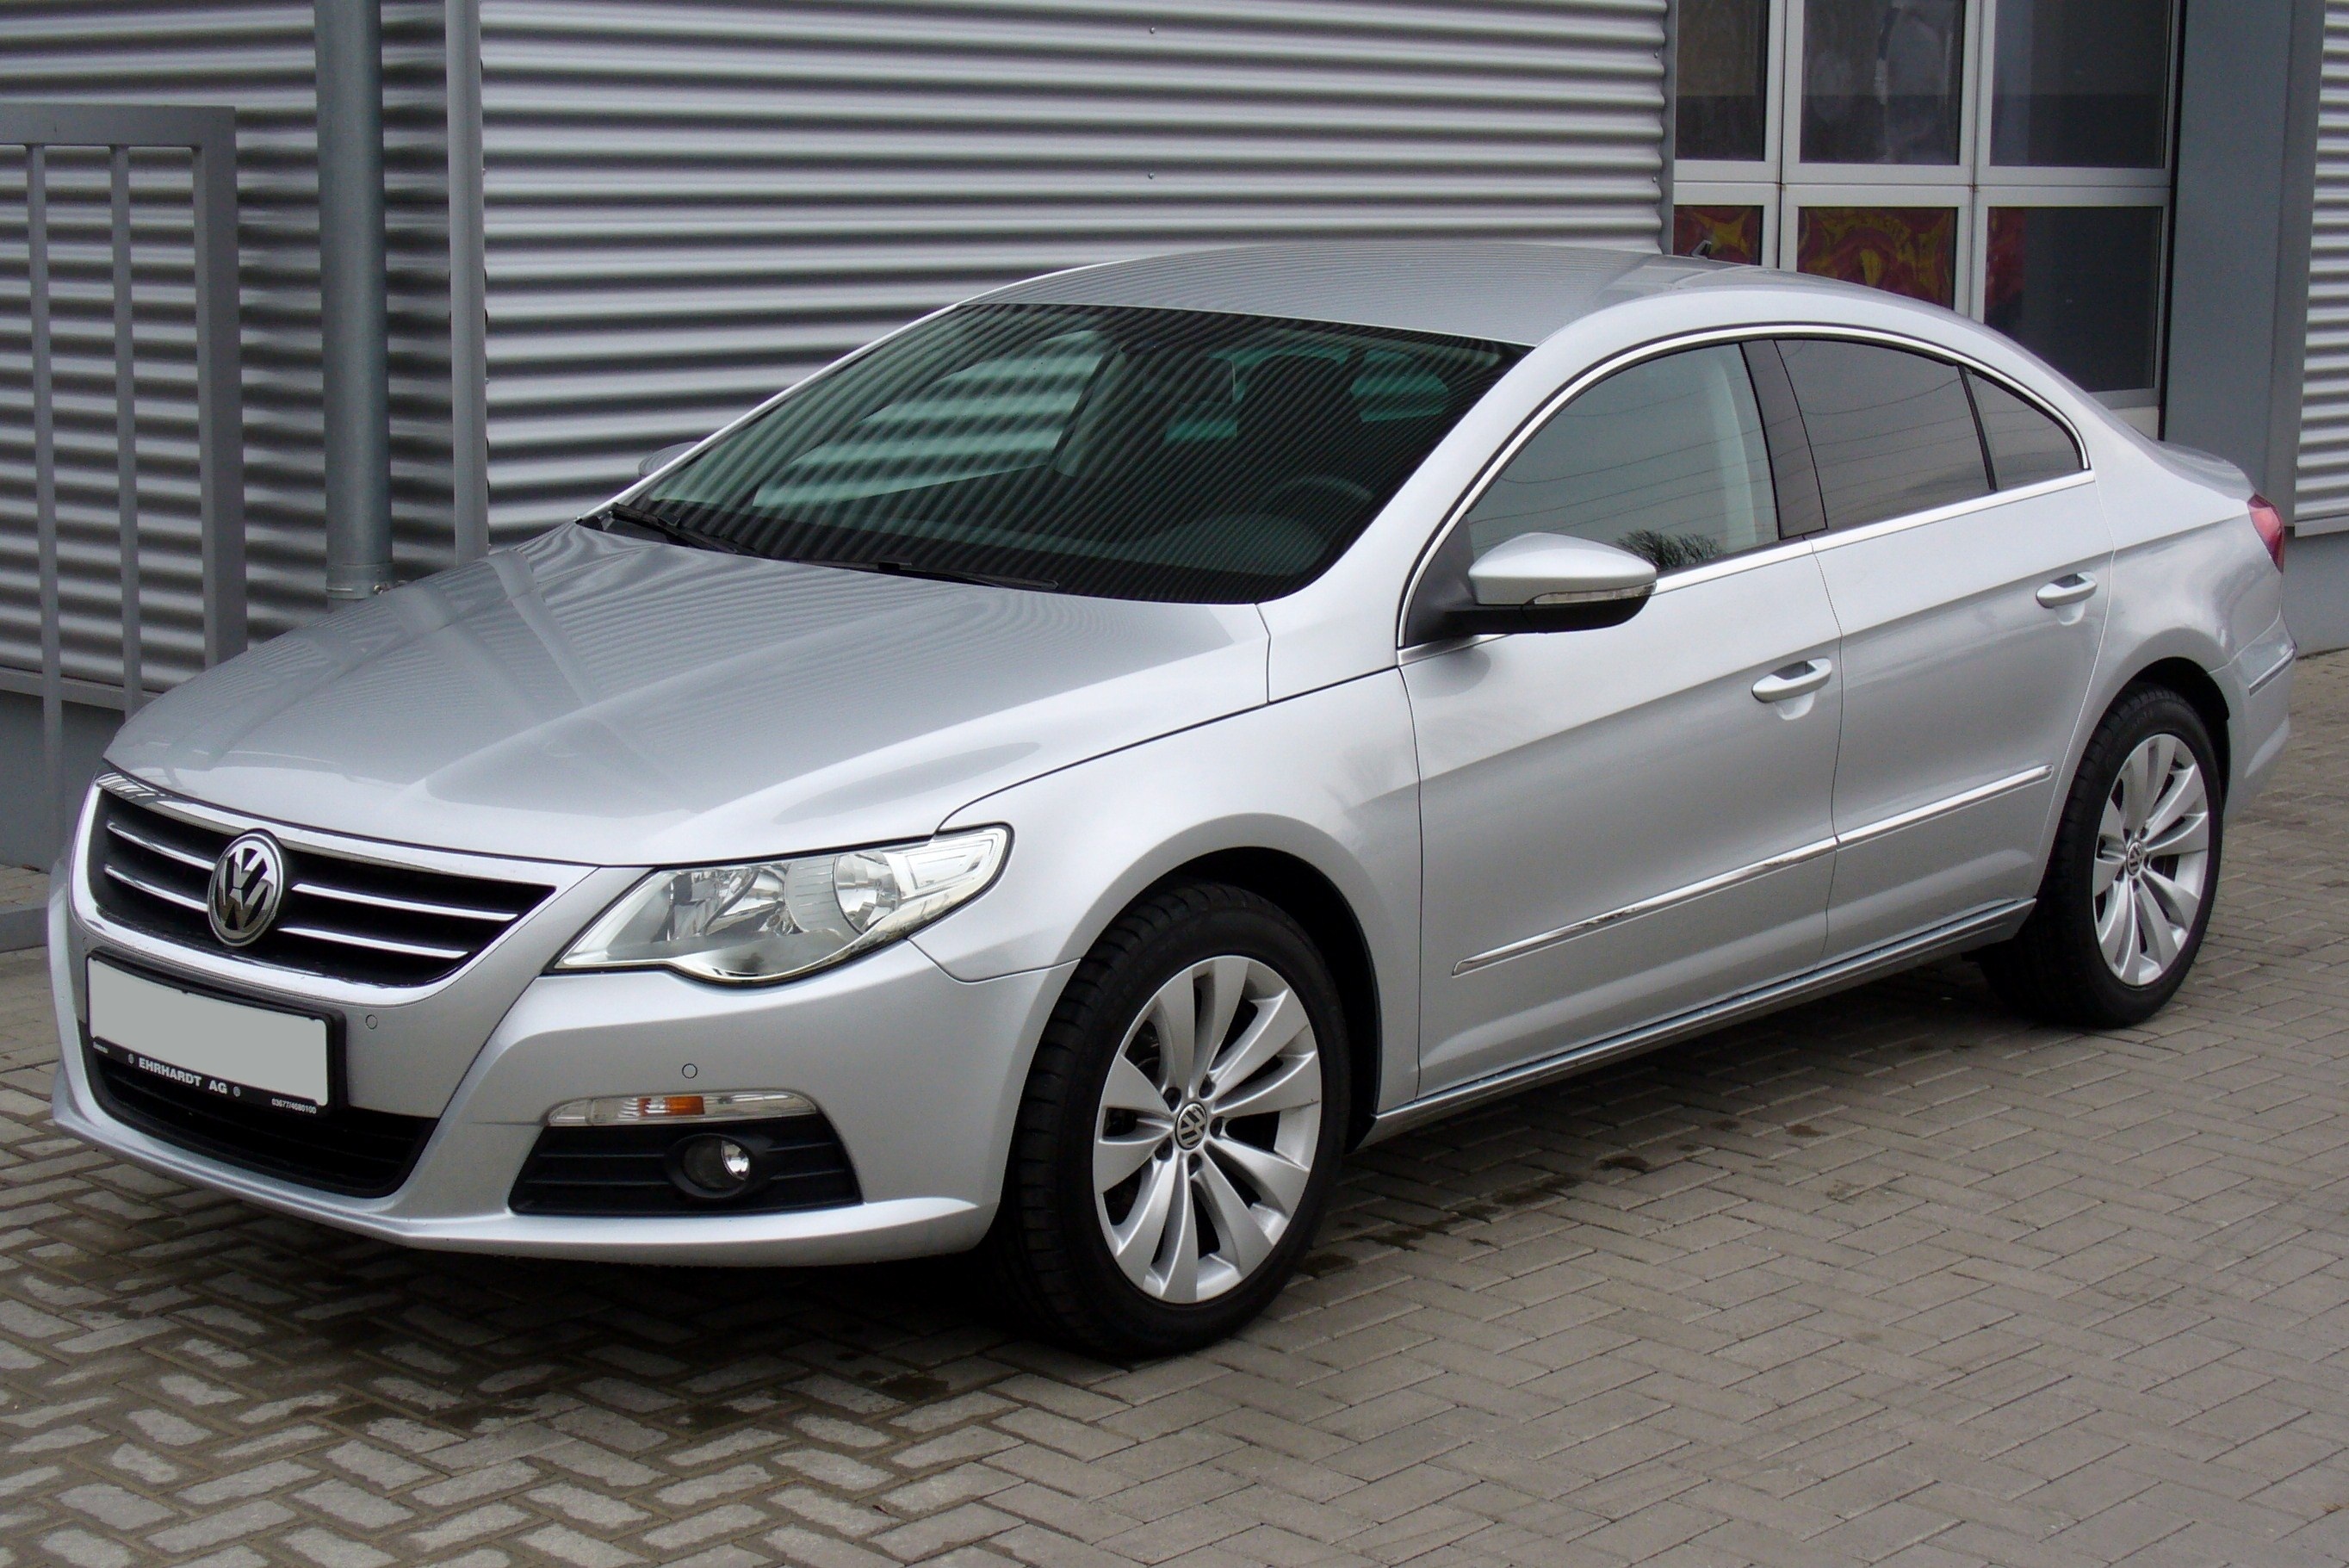 VW CC 2.0 TDI technical details, history, photos on Better